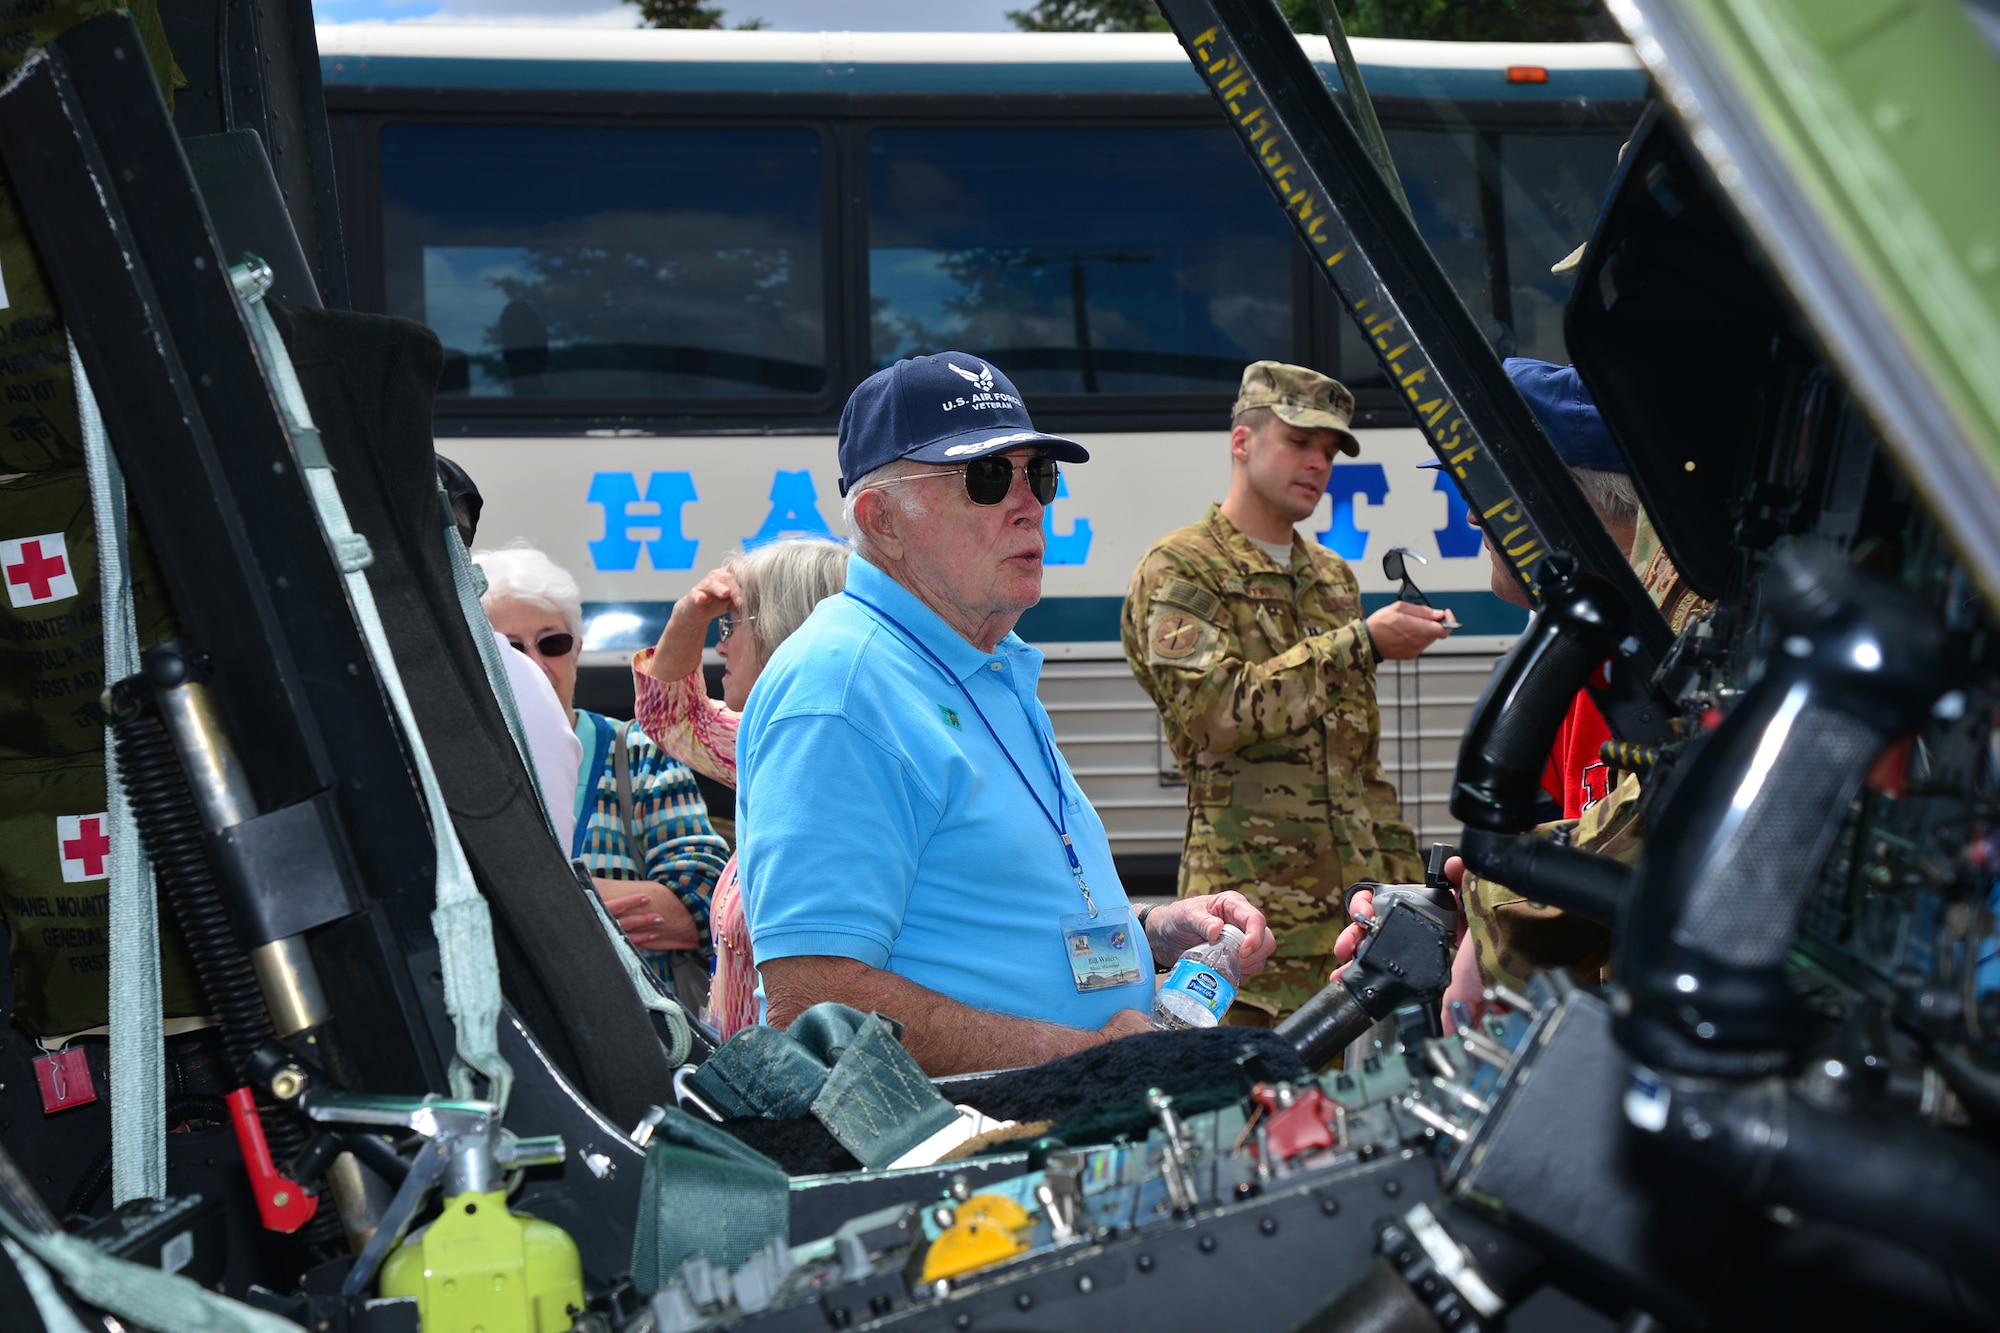 A member of the United States Air Force Helicopter Pilot Association inspects a UH-1N Iroquois at Sun Plaza Park, July 14, 2016, at Malmstrom Air Force Base, Mont. The 40th Helicopter Squadron provided a static display for the guests to look at while visiting the base. (U.S. Air Force photo/Airman 1st Class Daniel Brosam)